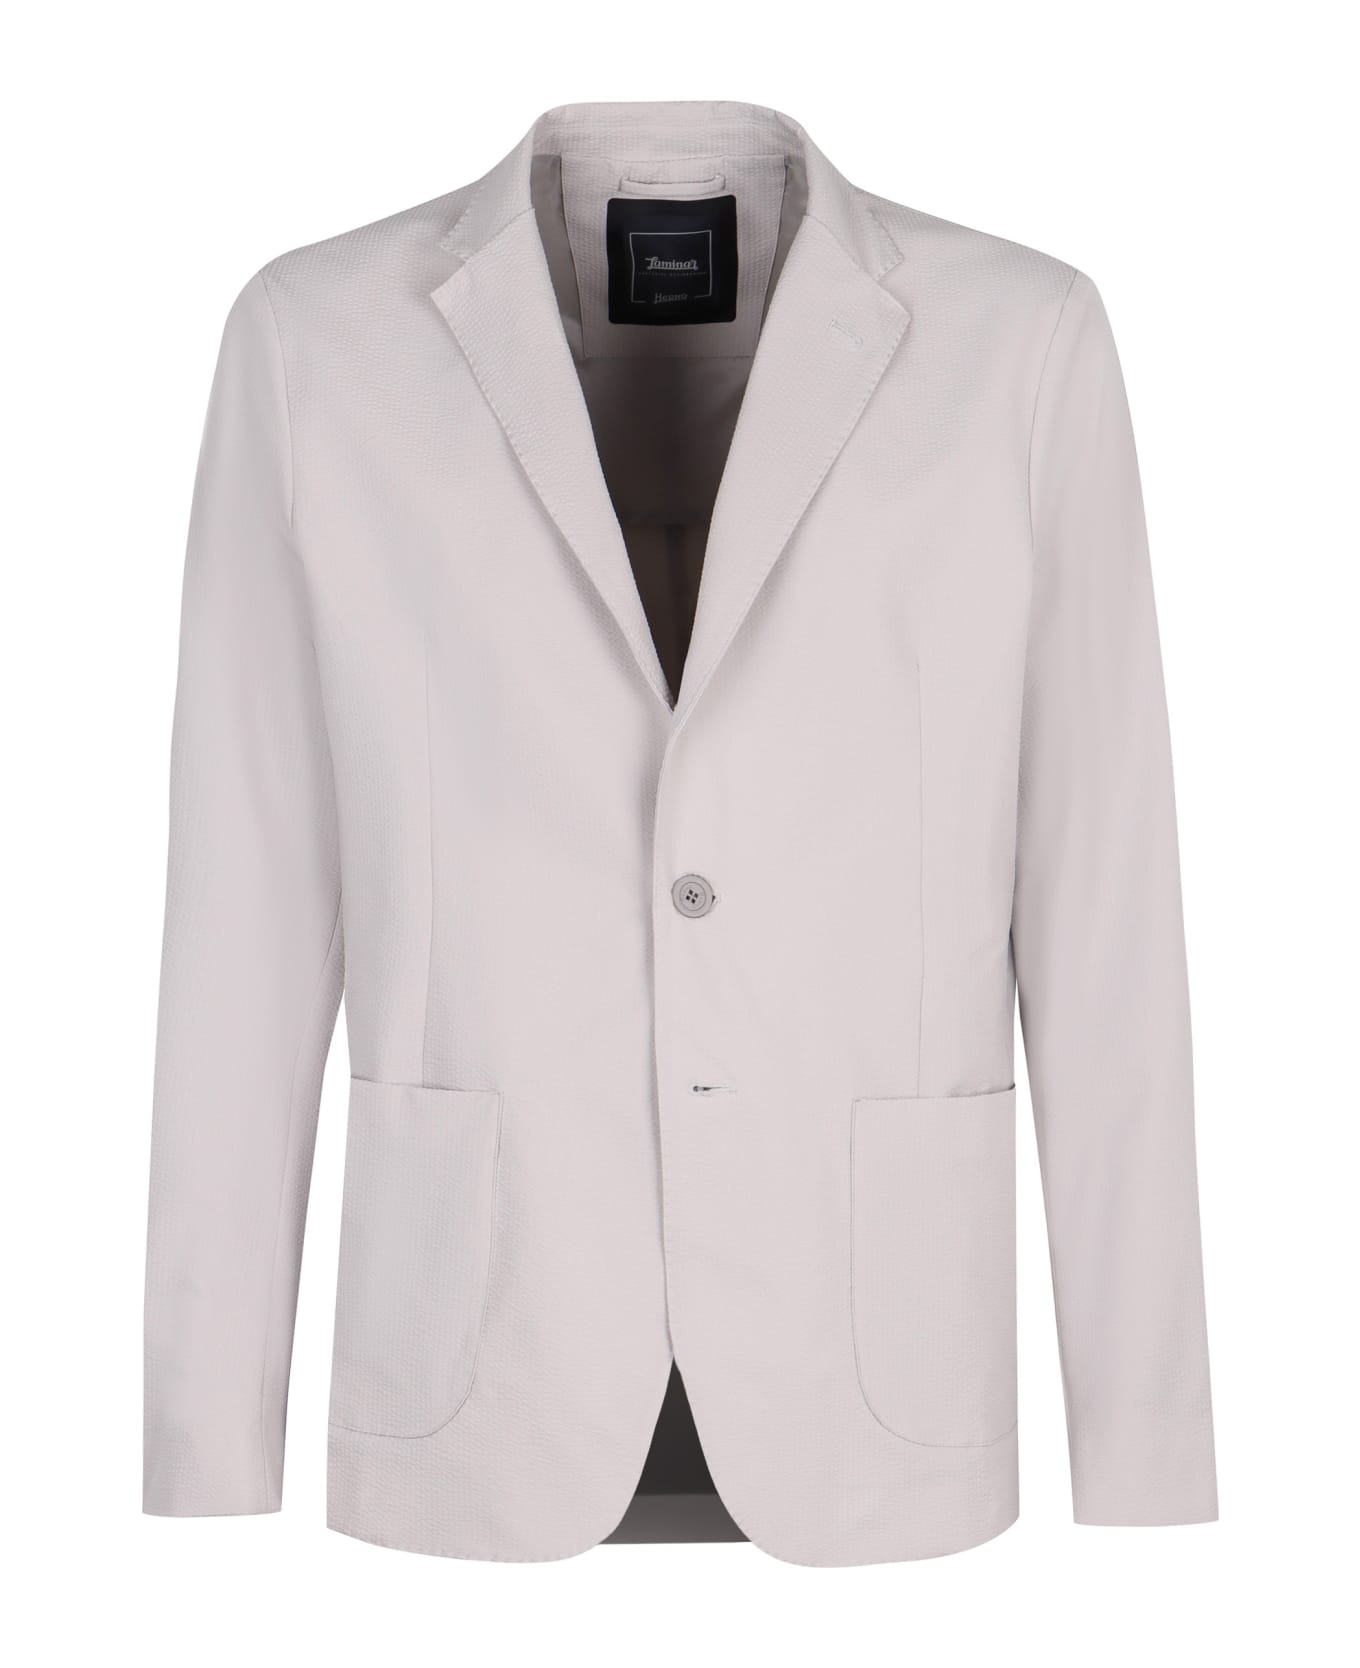 Herno Single-breasted Two-button Jacket - Light Grey